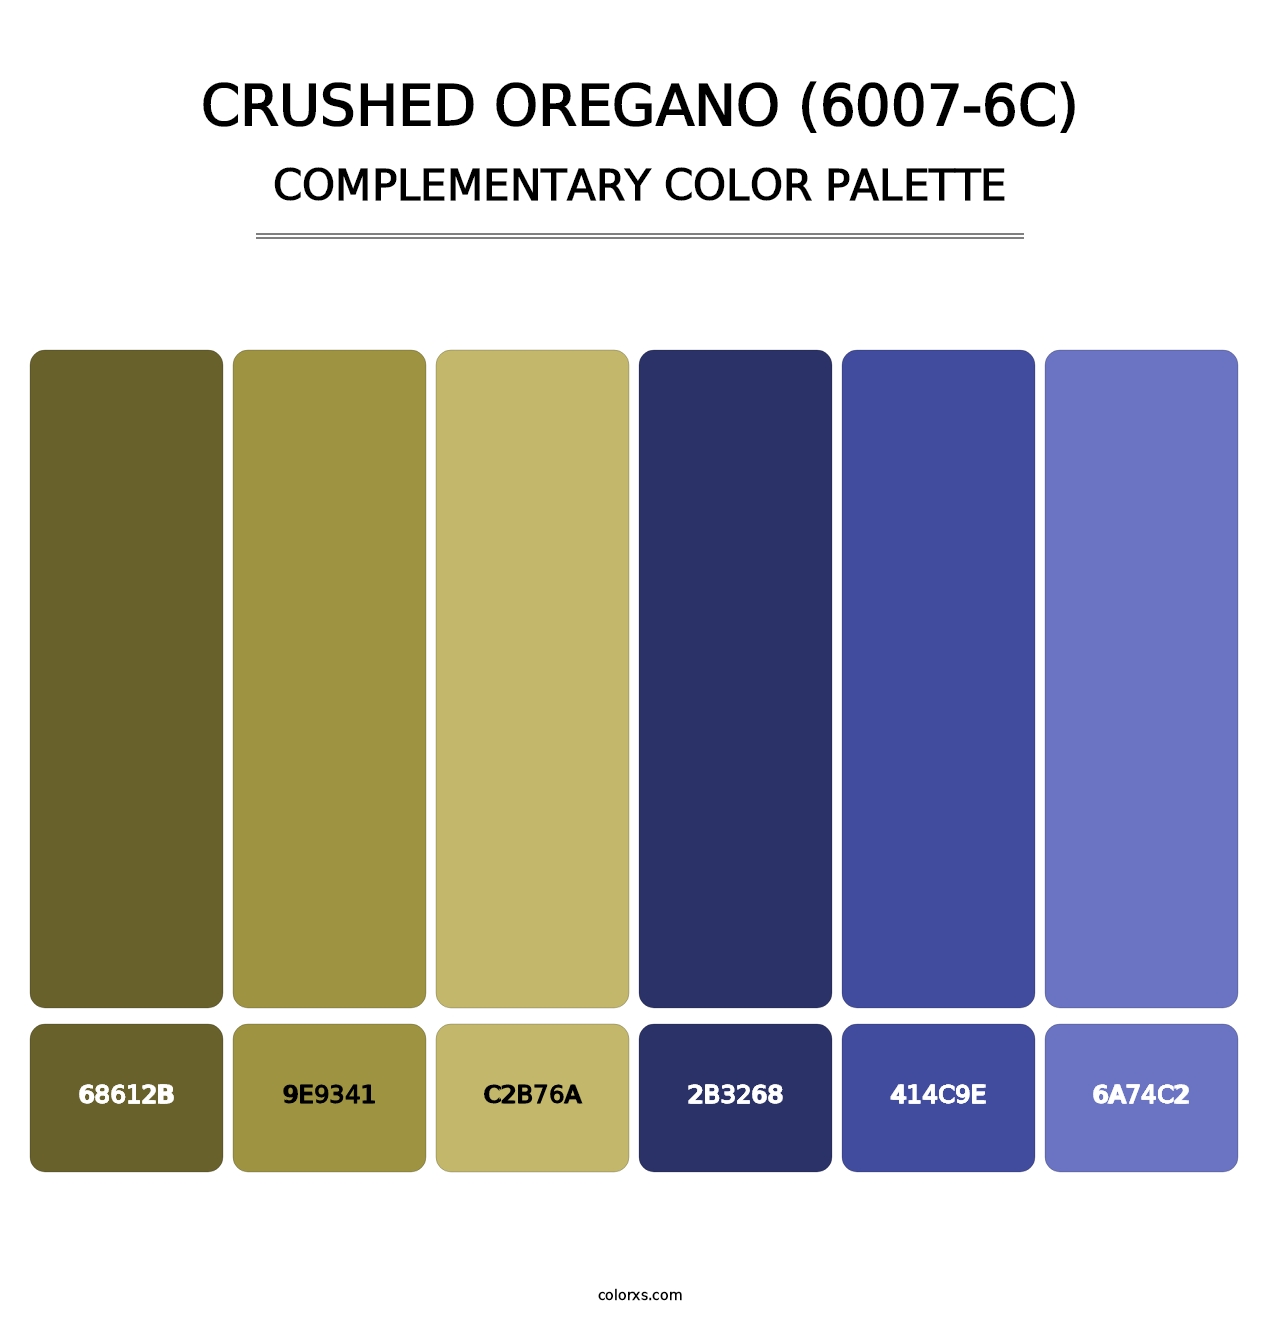 Crushed Oregano (6007-6C) - Complementary Color Palette